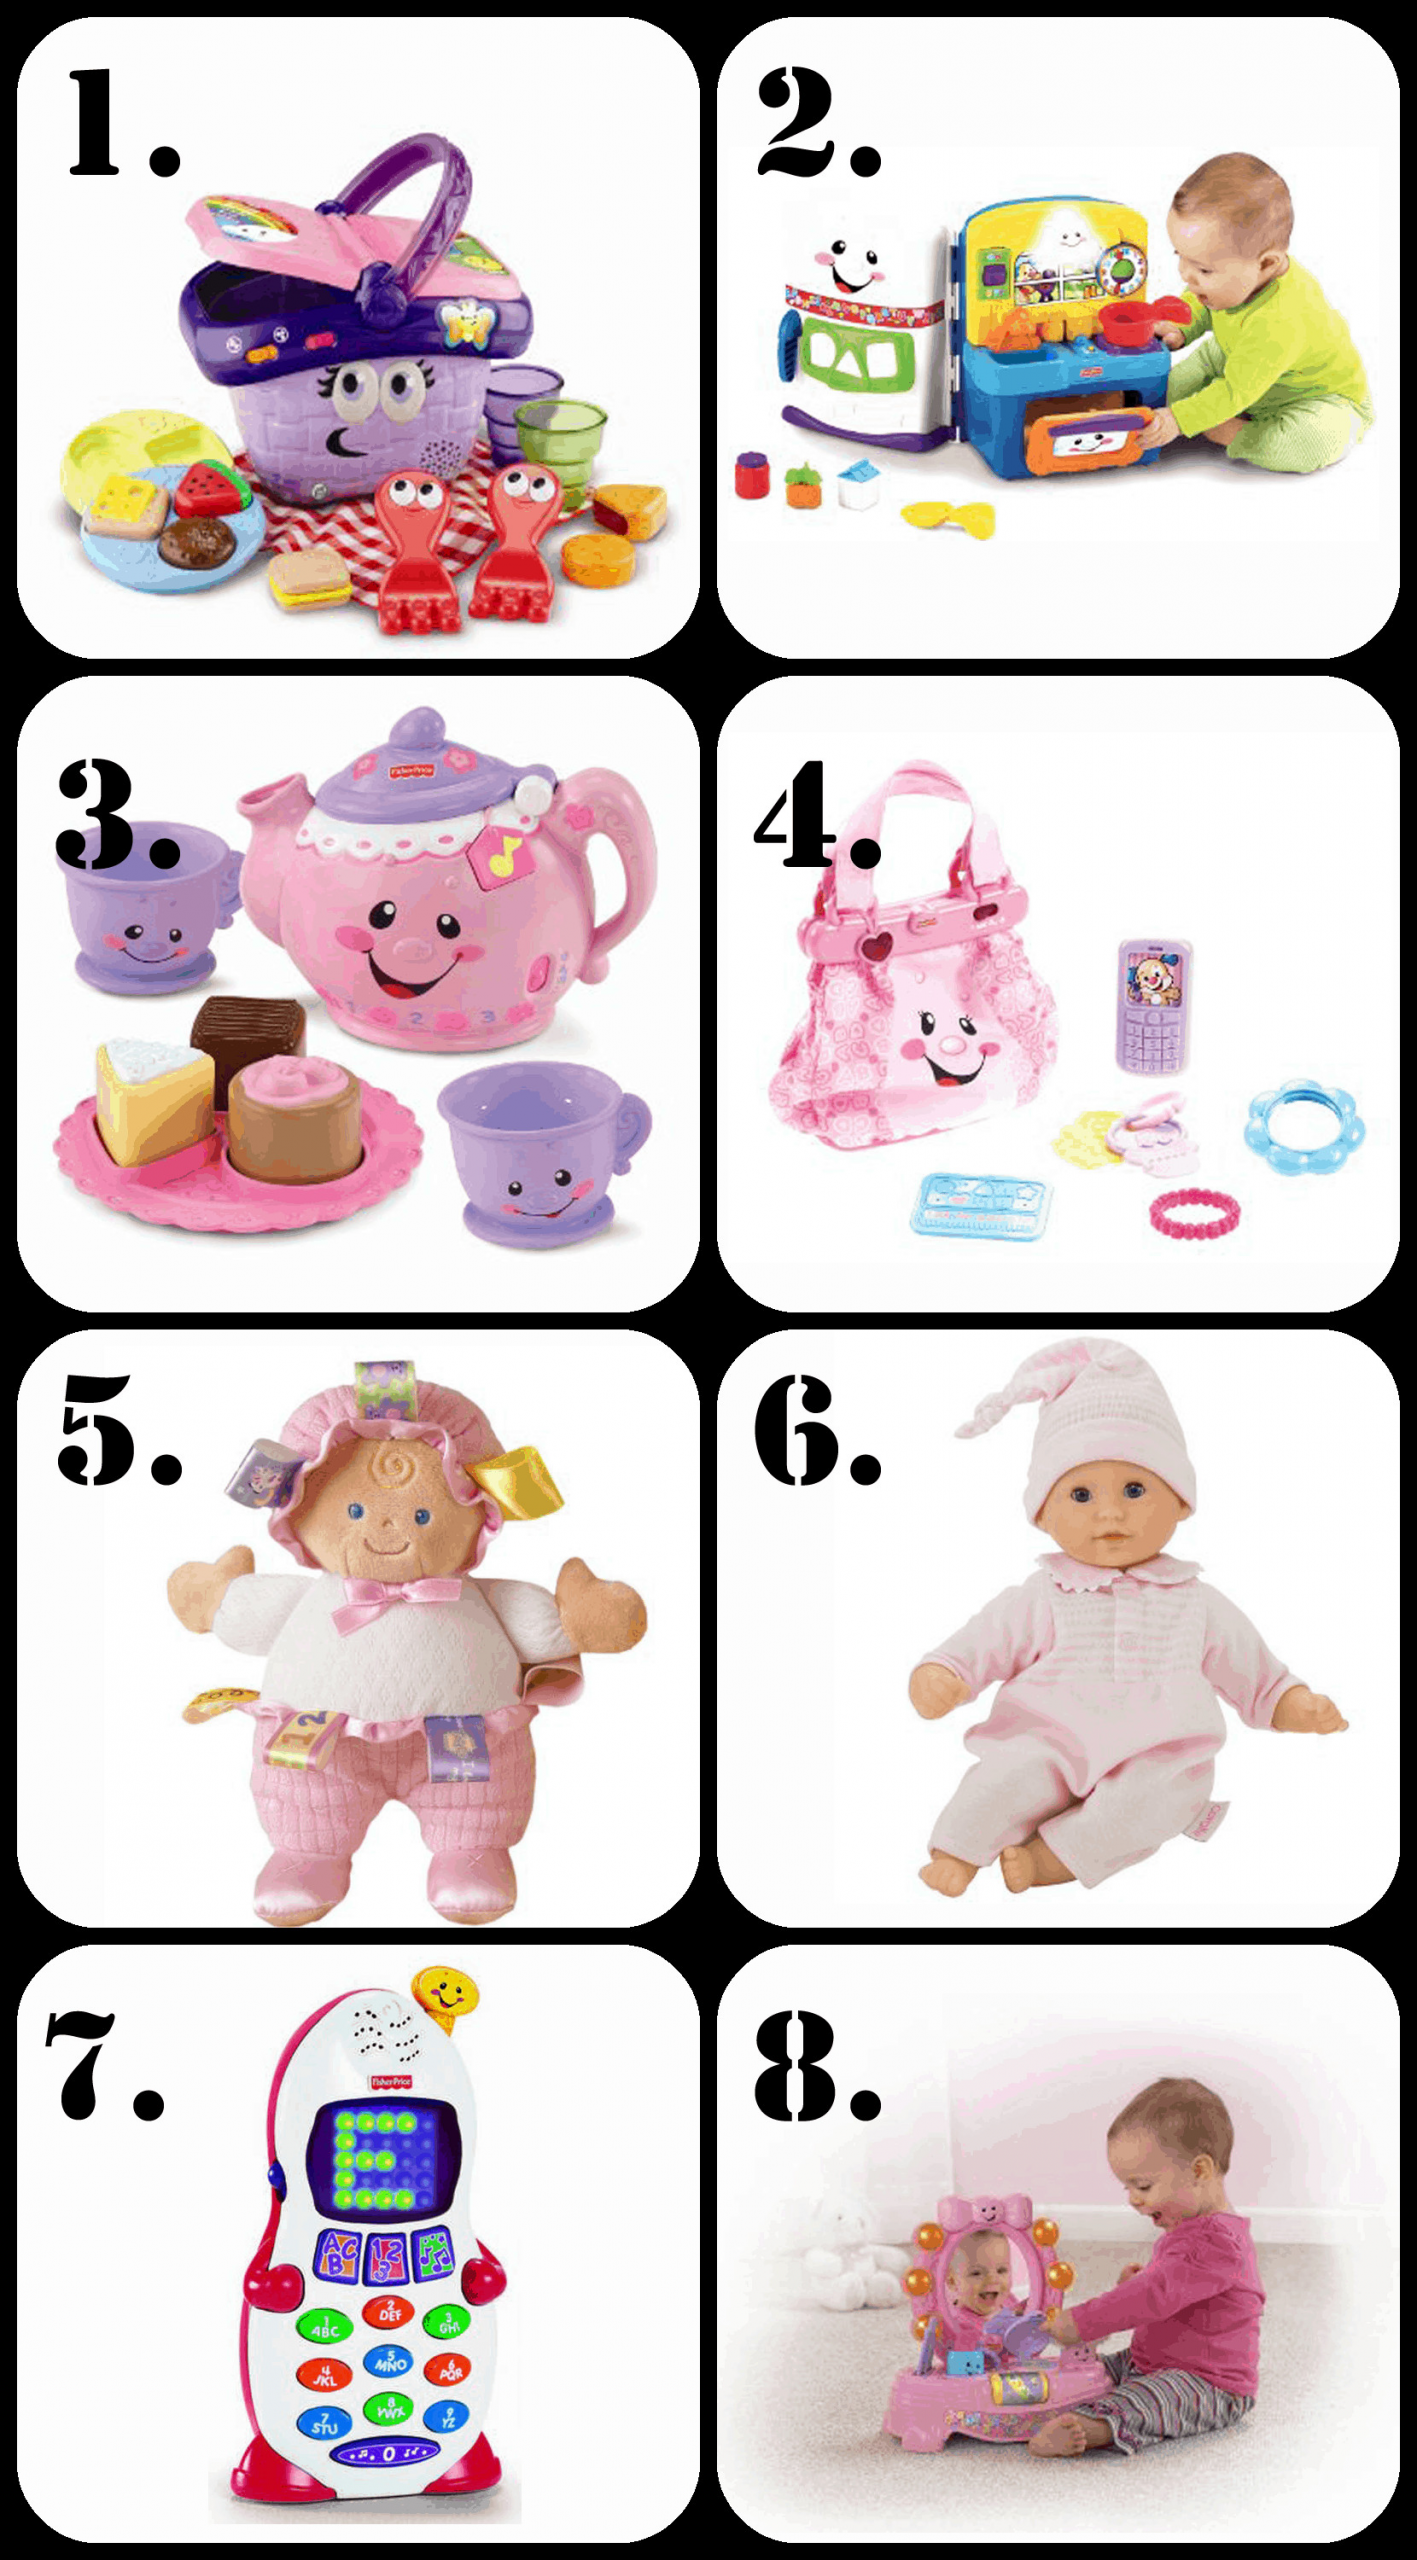 Gift For Baby Girl 1 Year Old
 The Ultimate List of Gift Ideas for a 1 Year Old Girl